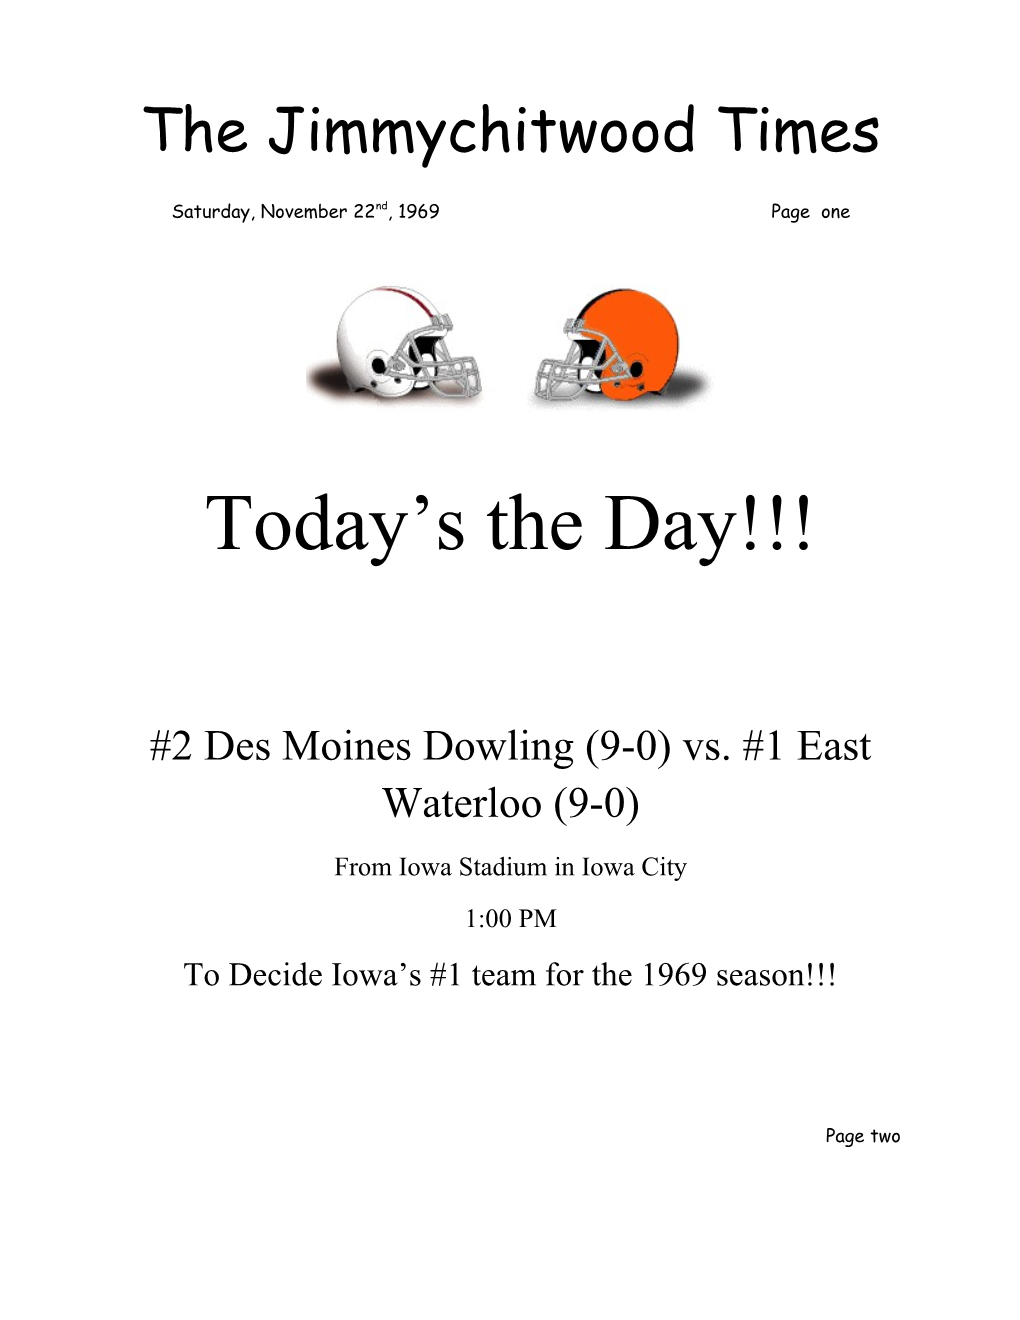 2 Des Moines Dowling (9-0) Vs. #1 East Waterloo (9-0)